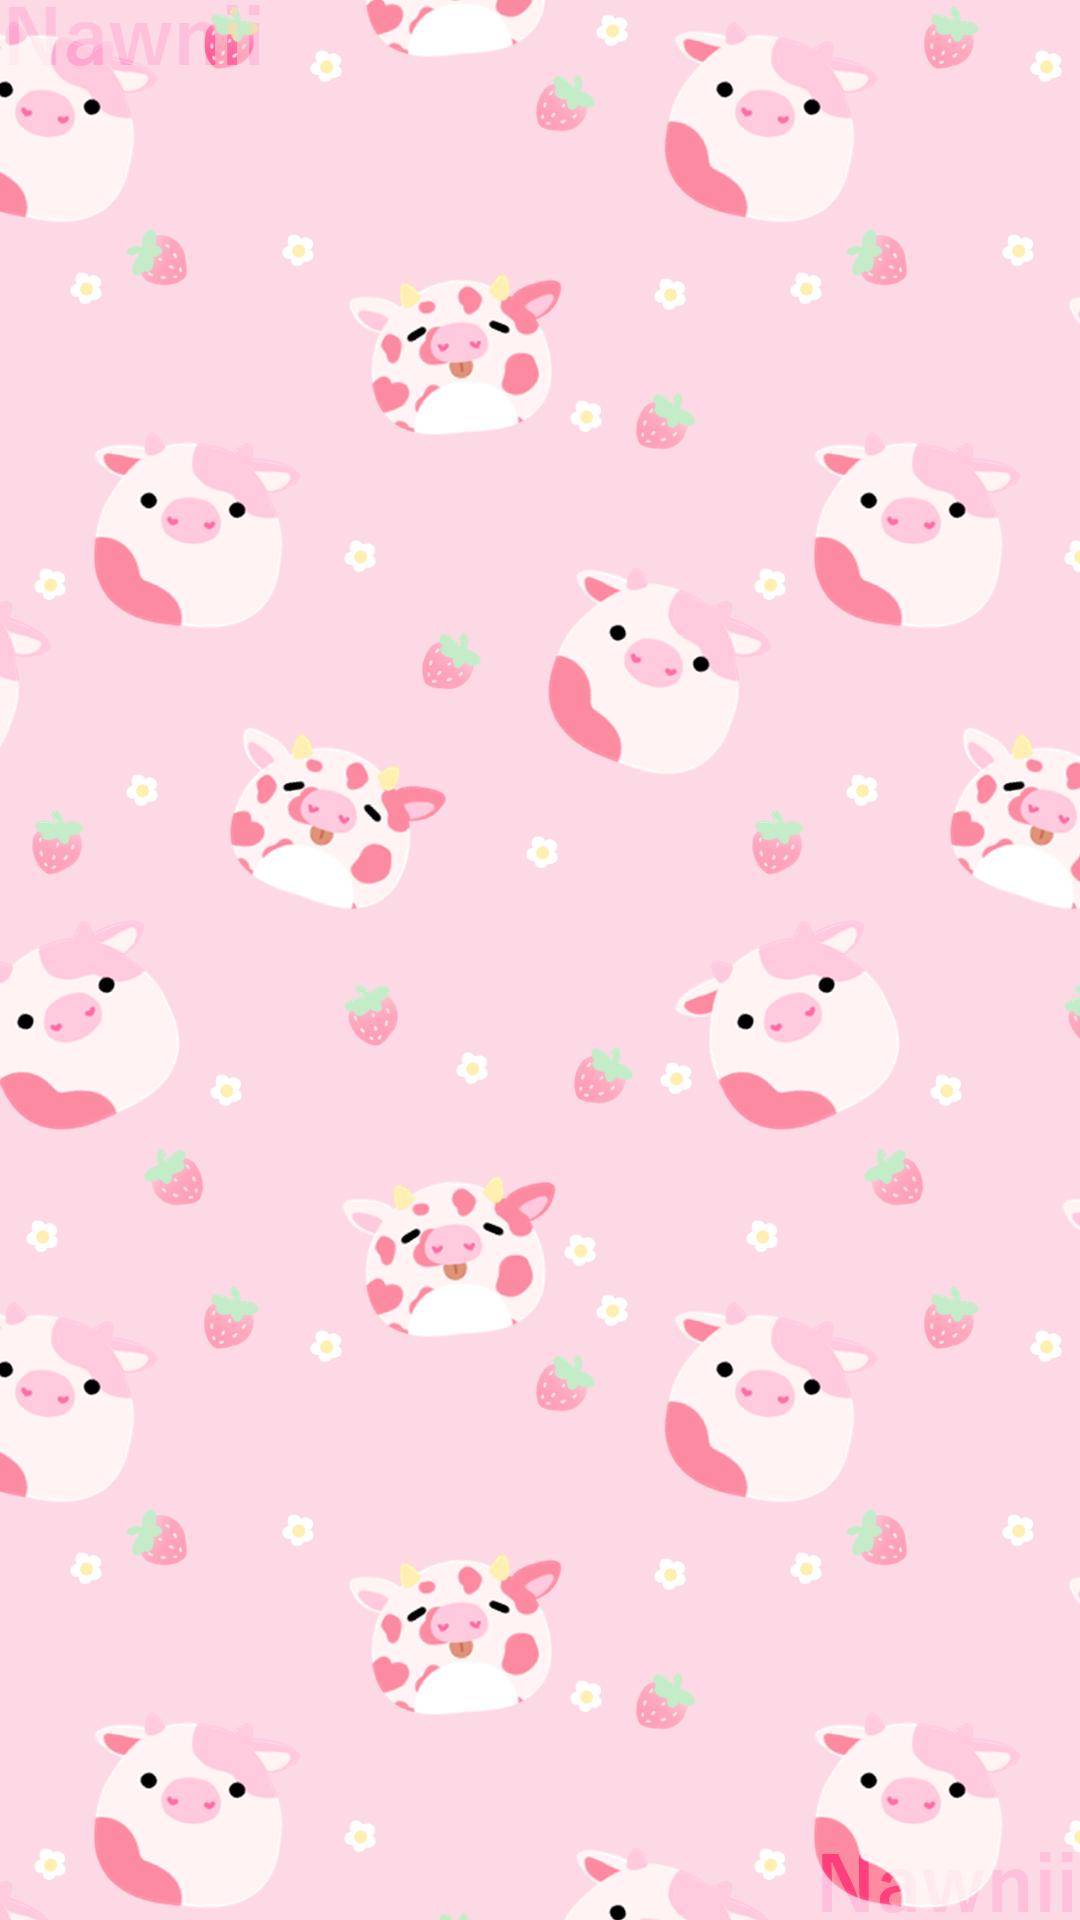 Nawnii Wallpaper I made! #squishmallows